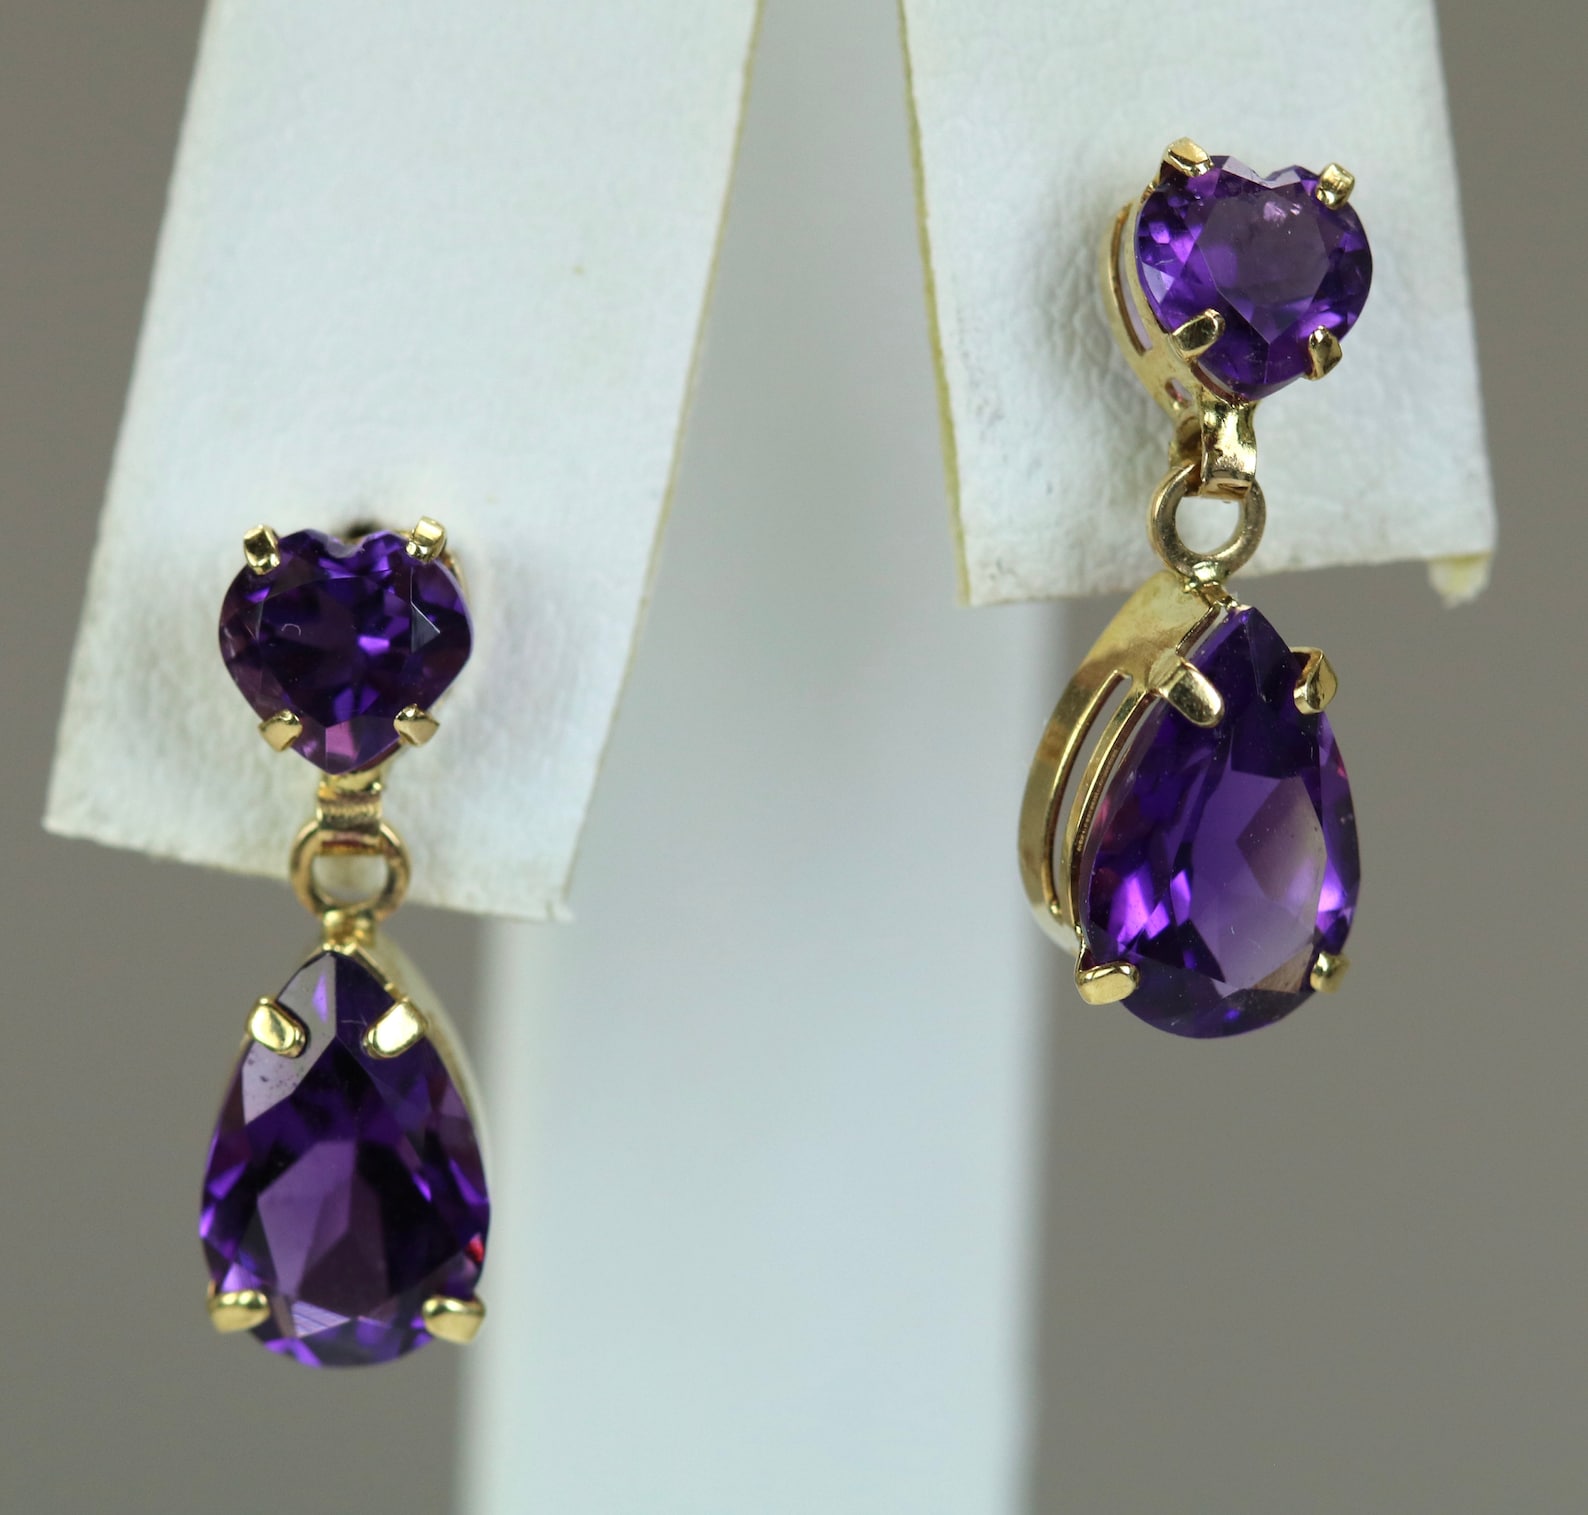 Vintage 14K Yellow Gold 2.7ctw Amethyst Earrings Hearts over | Etsy